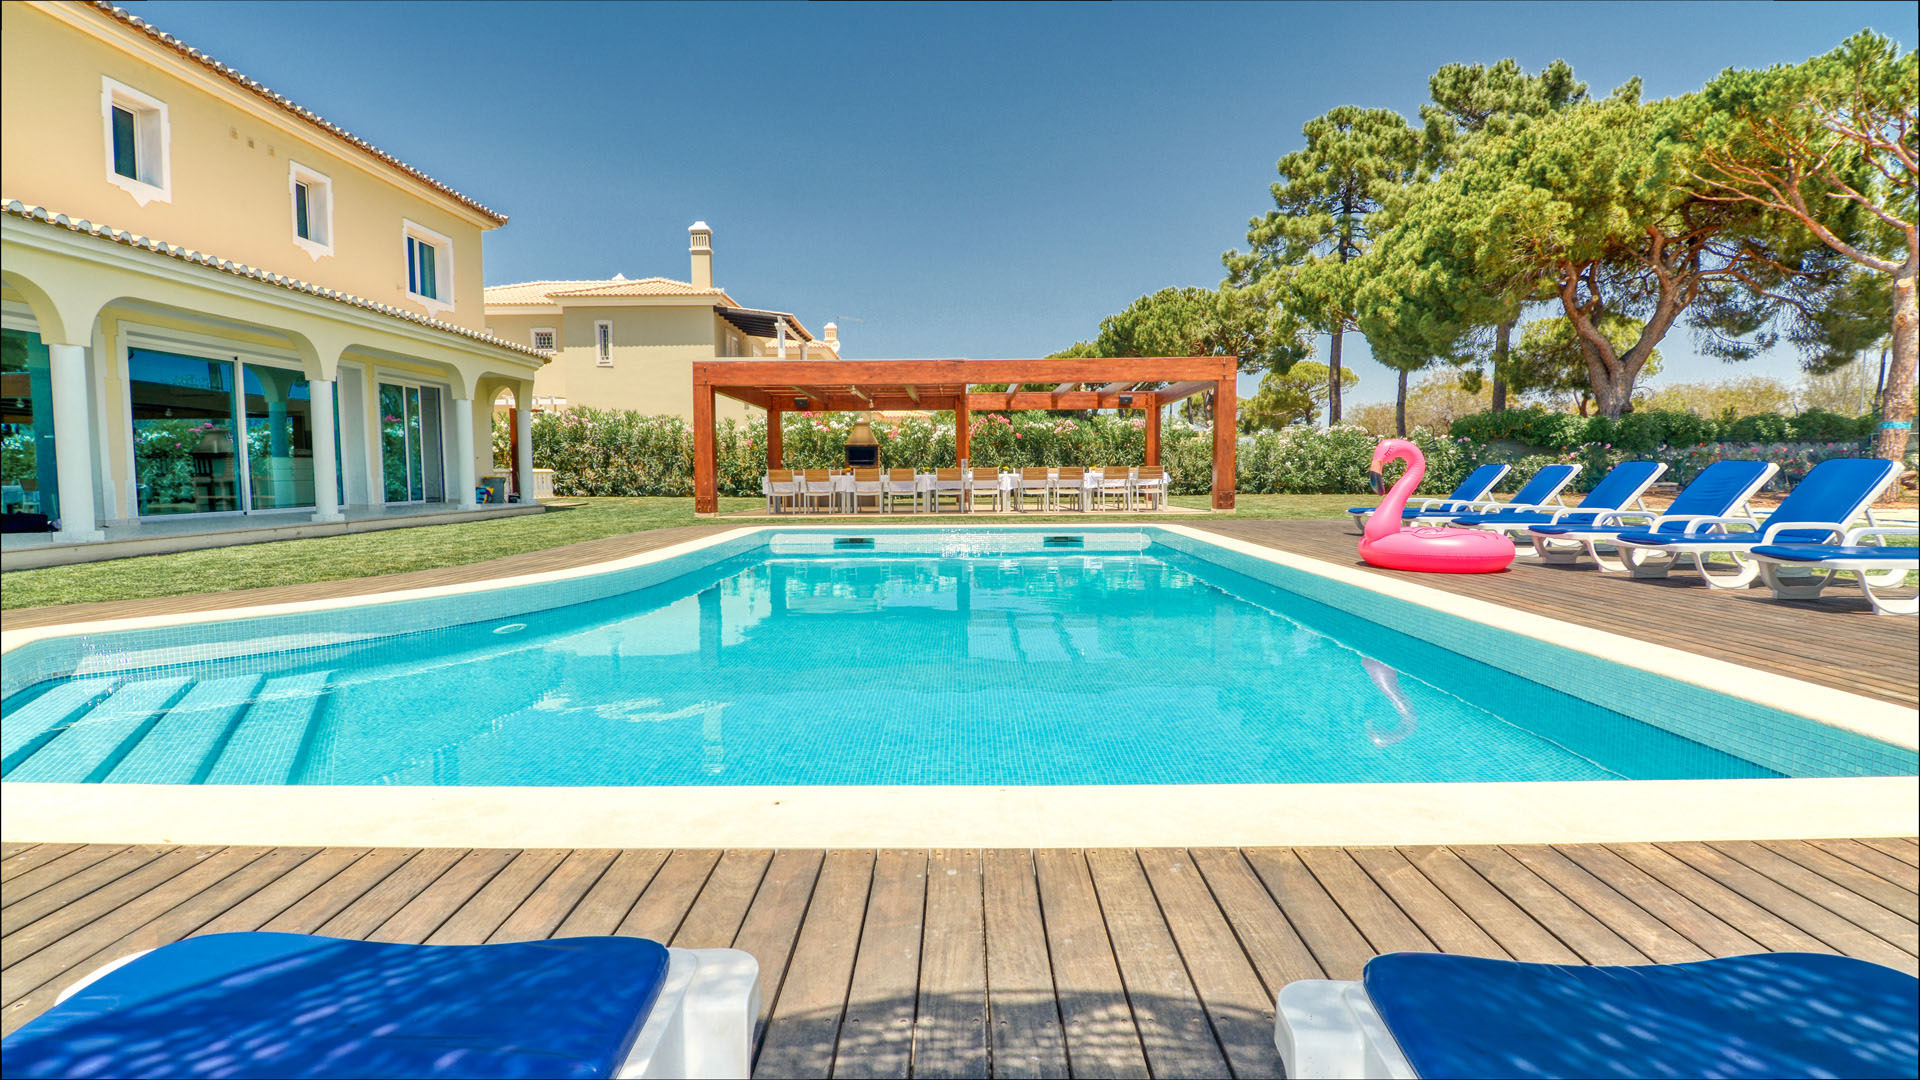 Luxurious Algarve Villa with Oversized Back Garden, Pool, and Yachts for Rent